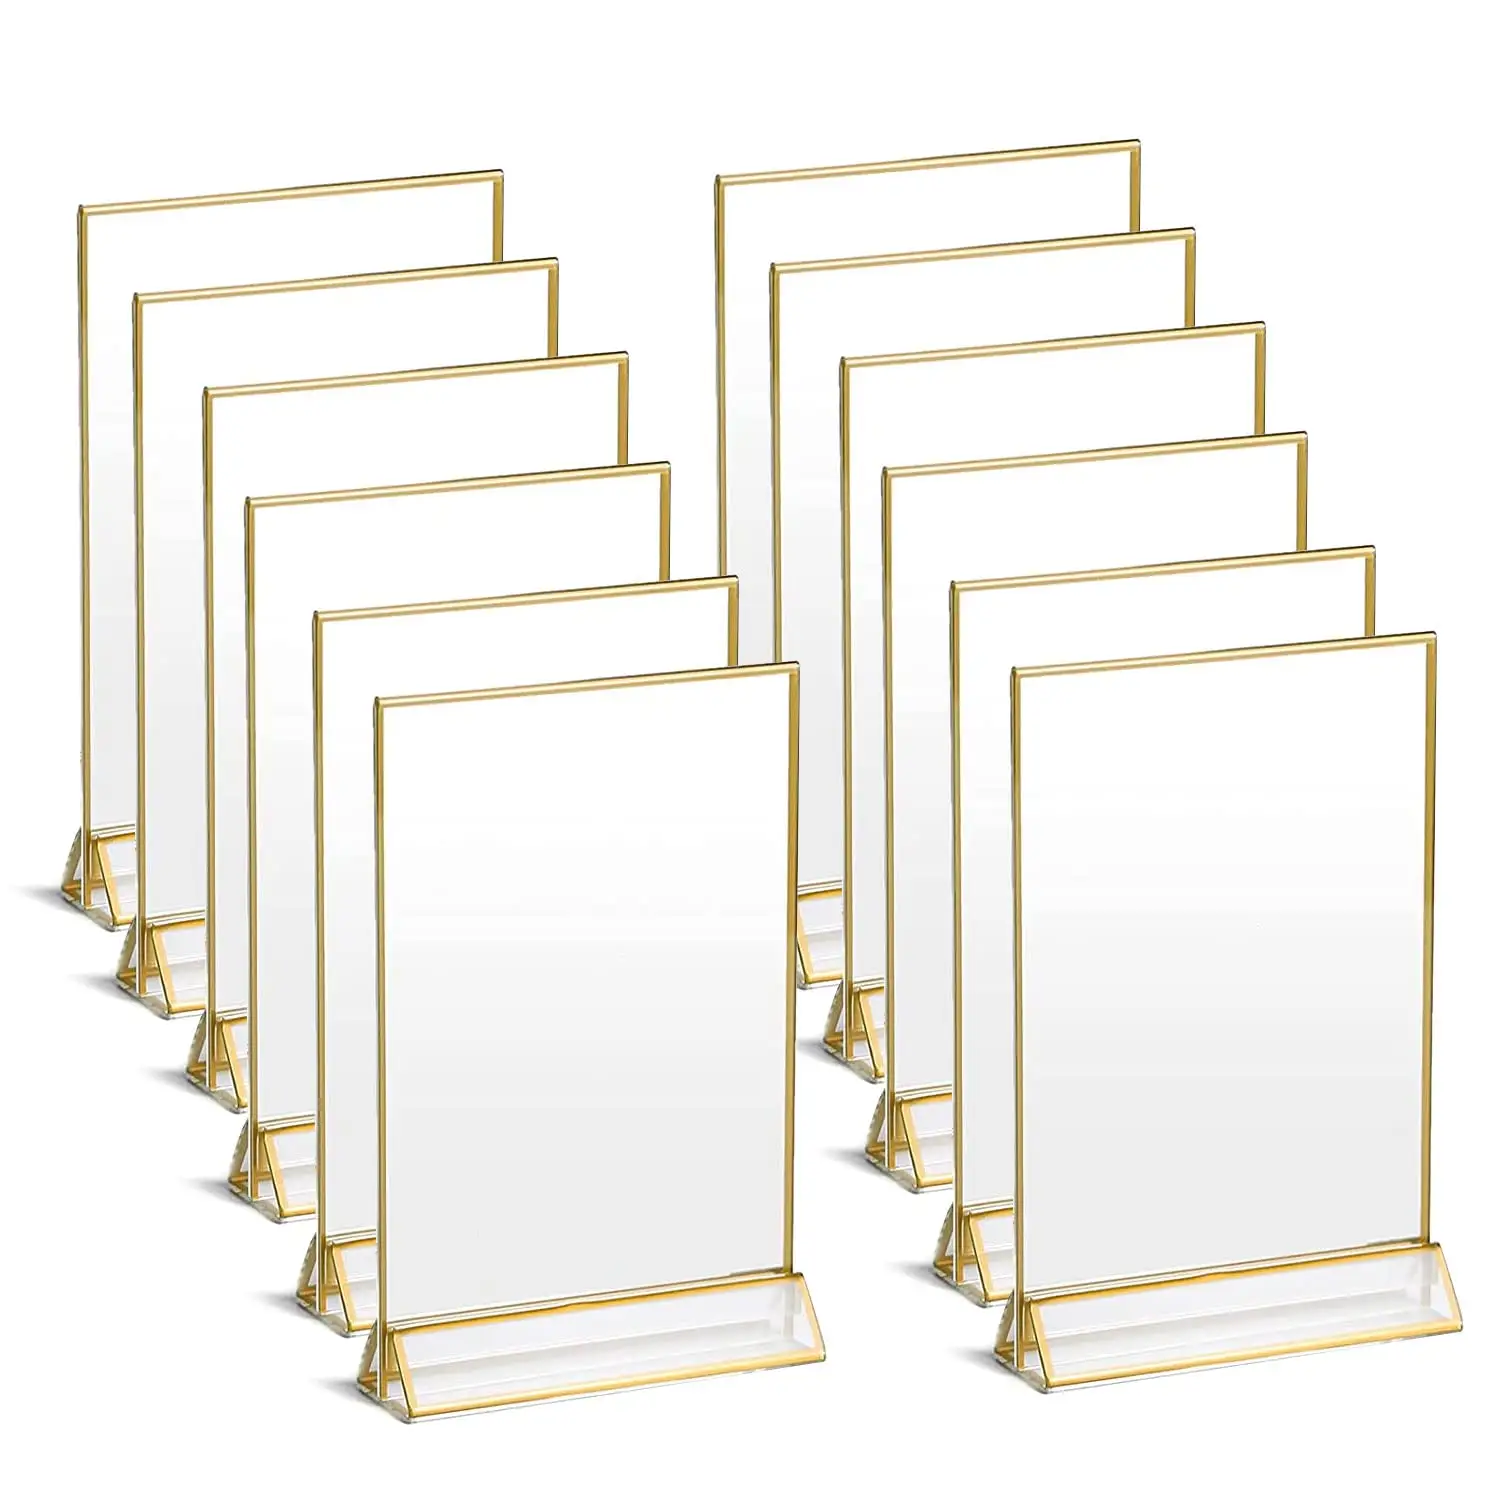 6 Pack Double Sided Acrylic Sign Holder Table Menu Display Stand Wedding Table Numbers Holders With Gold Borders